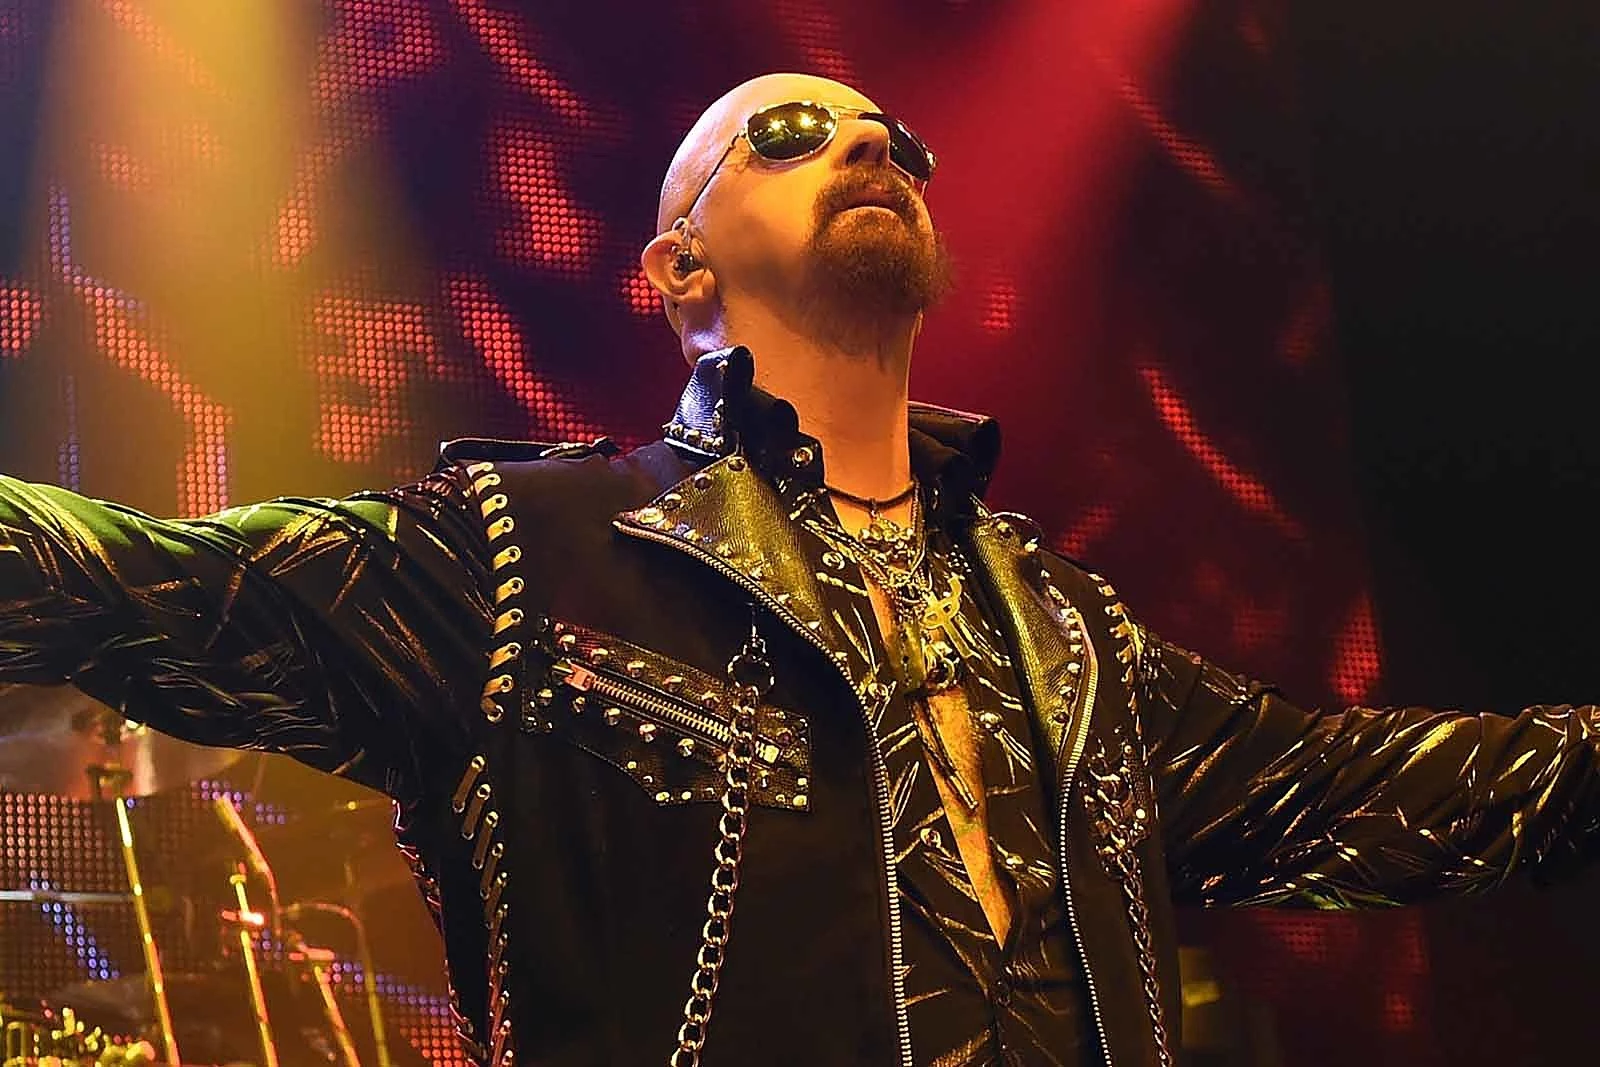 Judas Priest to Perform as Four-Piece for First Time Since 1974